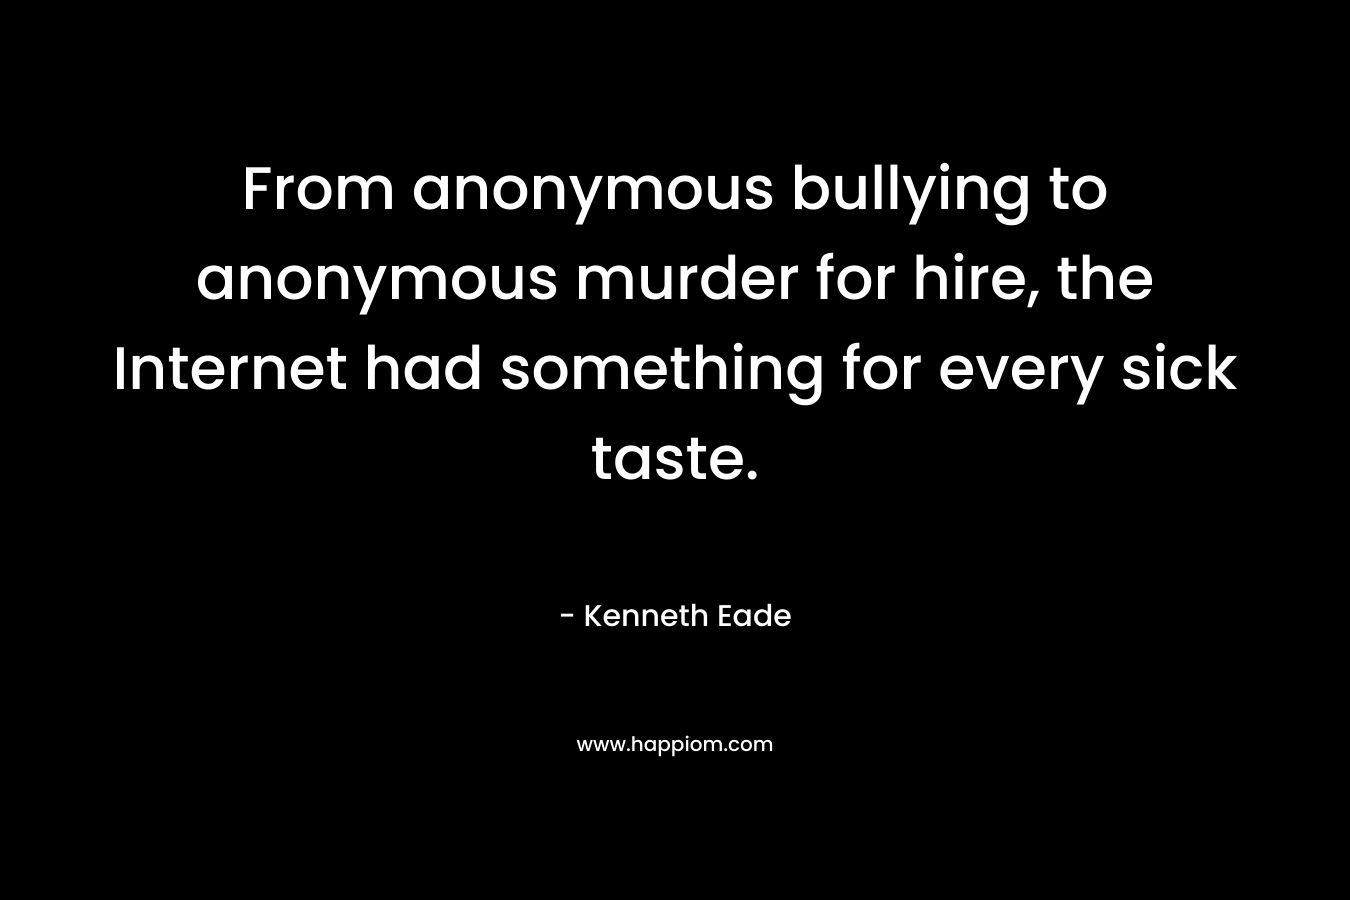 From anonymous bullying to anonymous murder for hire, the Internet had something for every sick taste. – Kenneth Eade